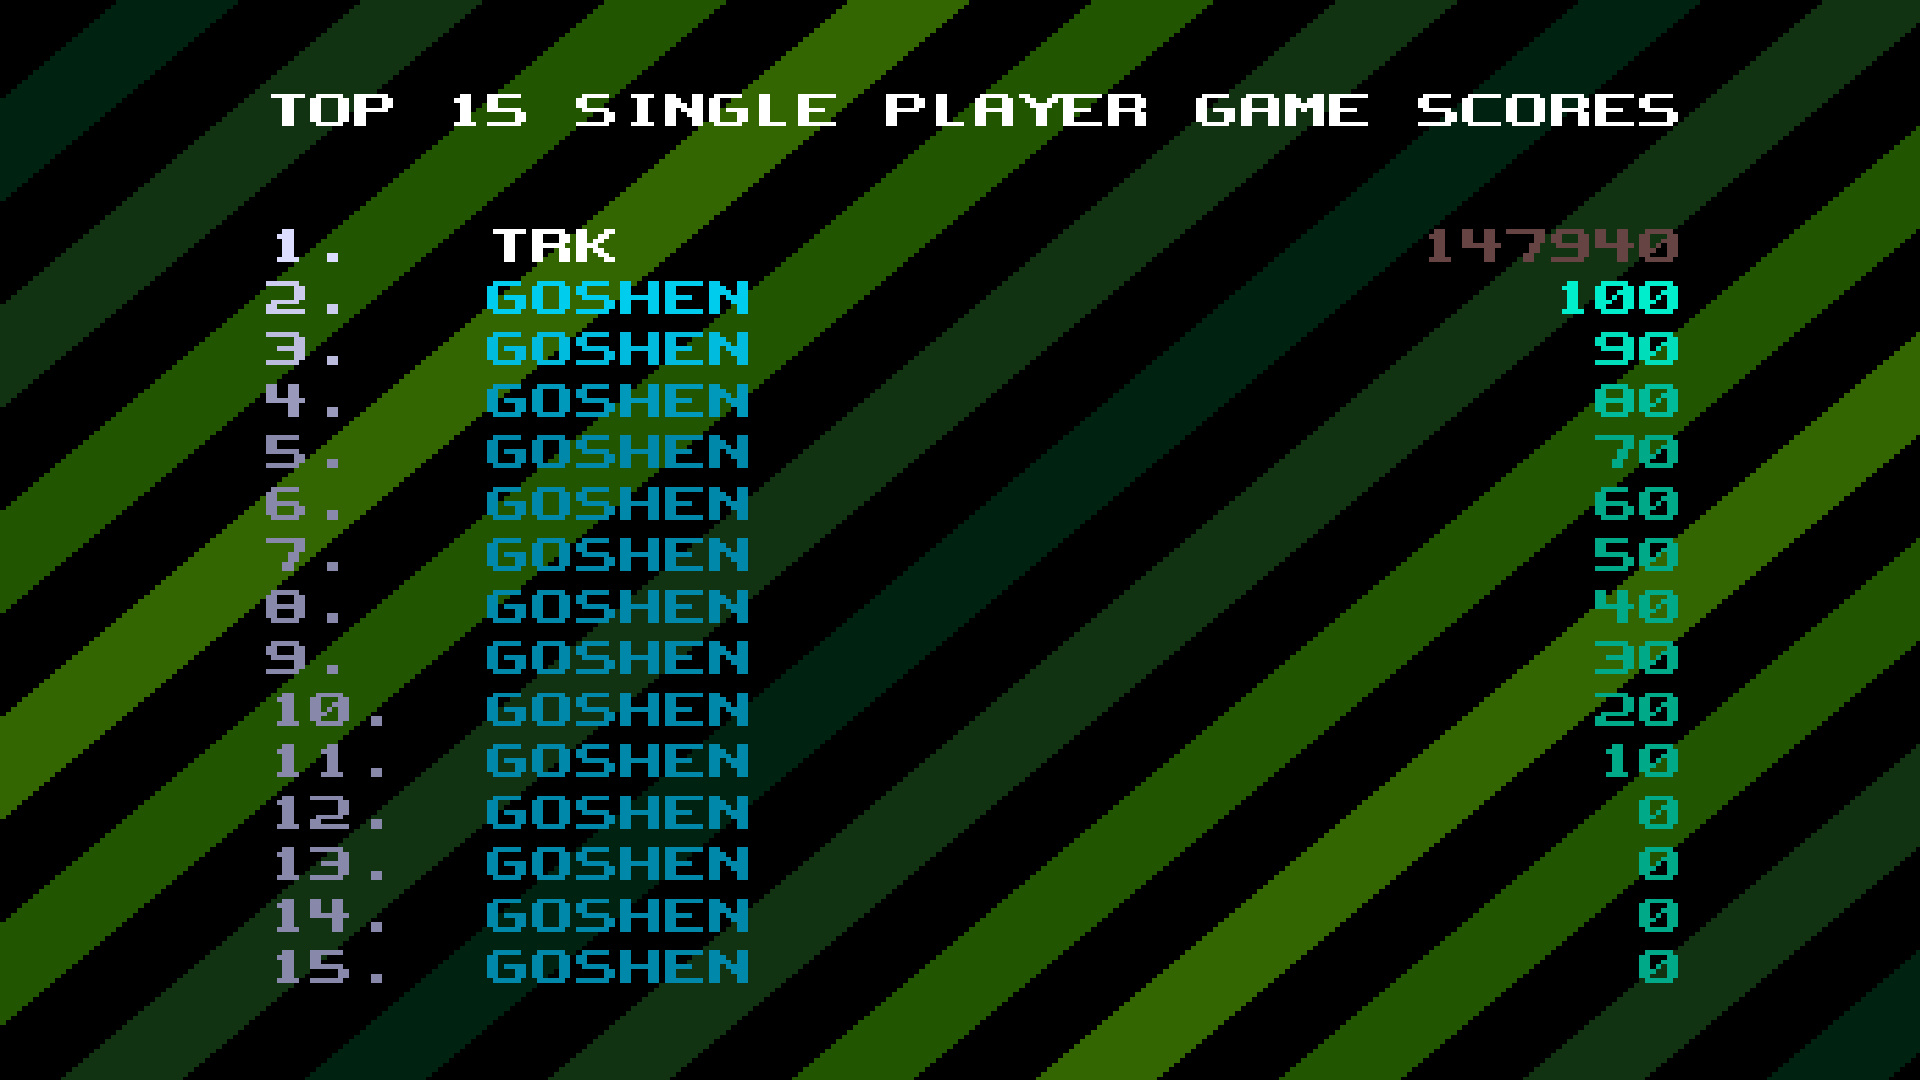 TheTrickster: Cybersphere [NTSC] (Amiga Emulated) 147,940 points on 2015-08-08 22:32:54